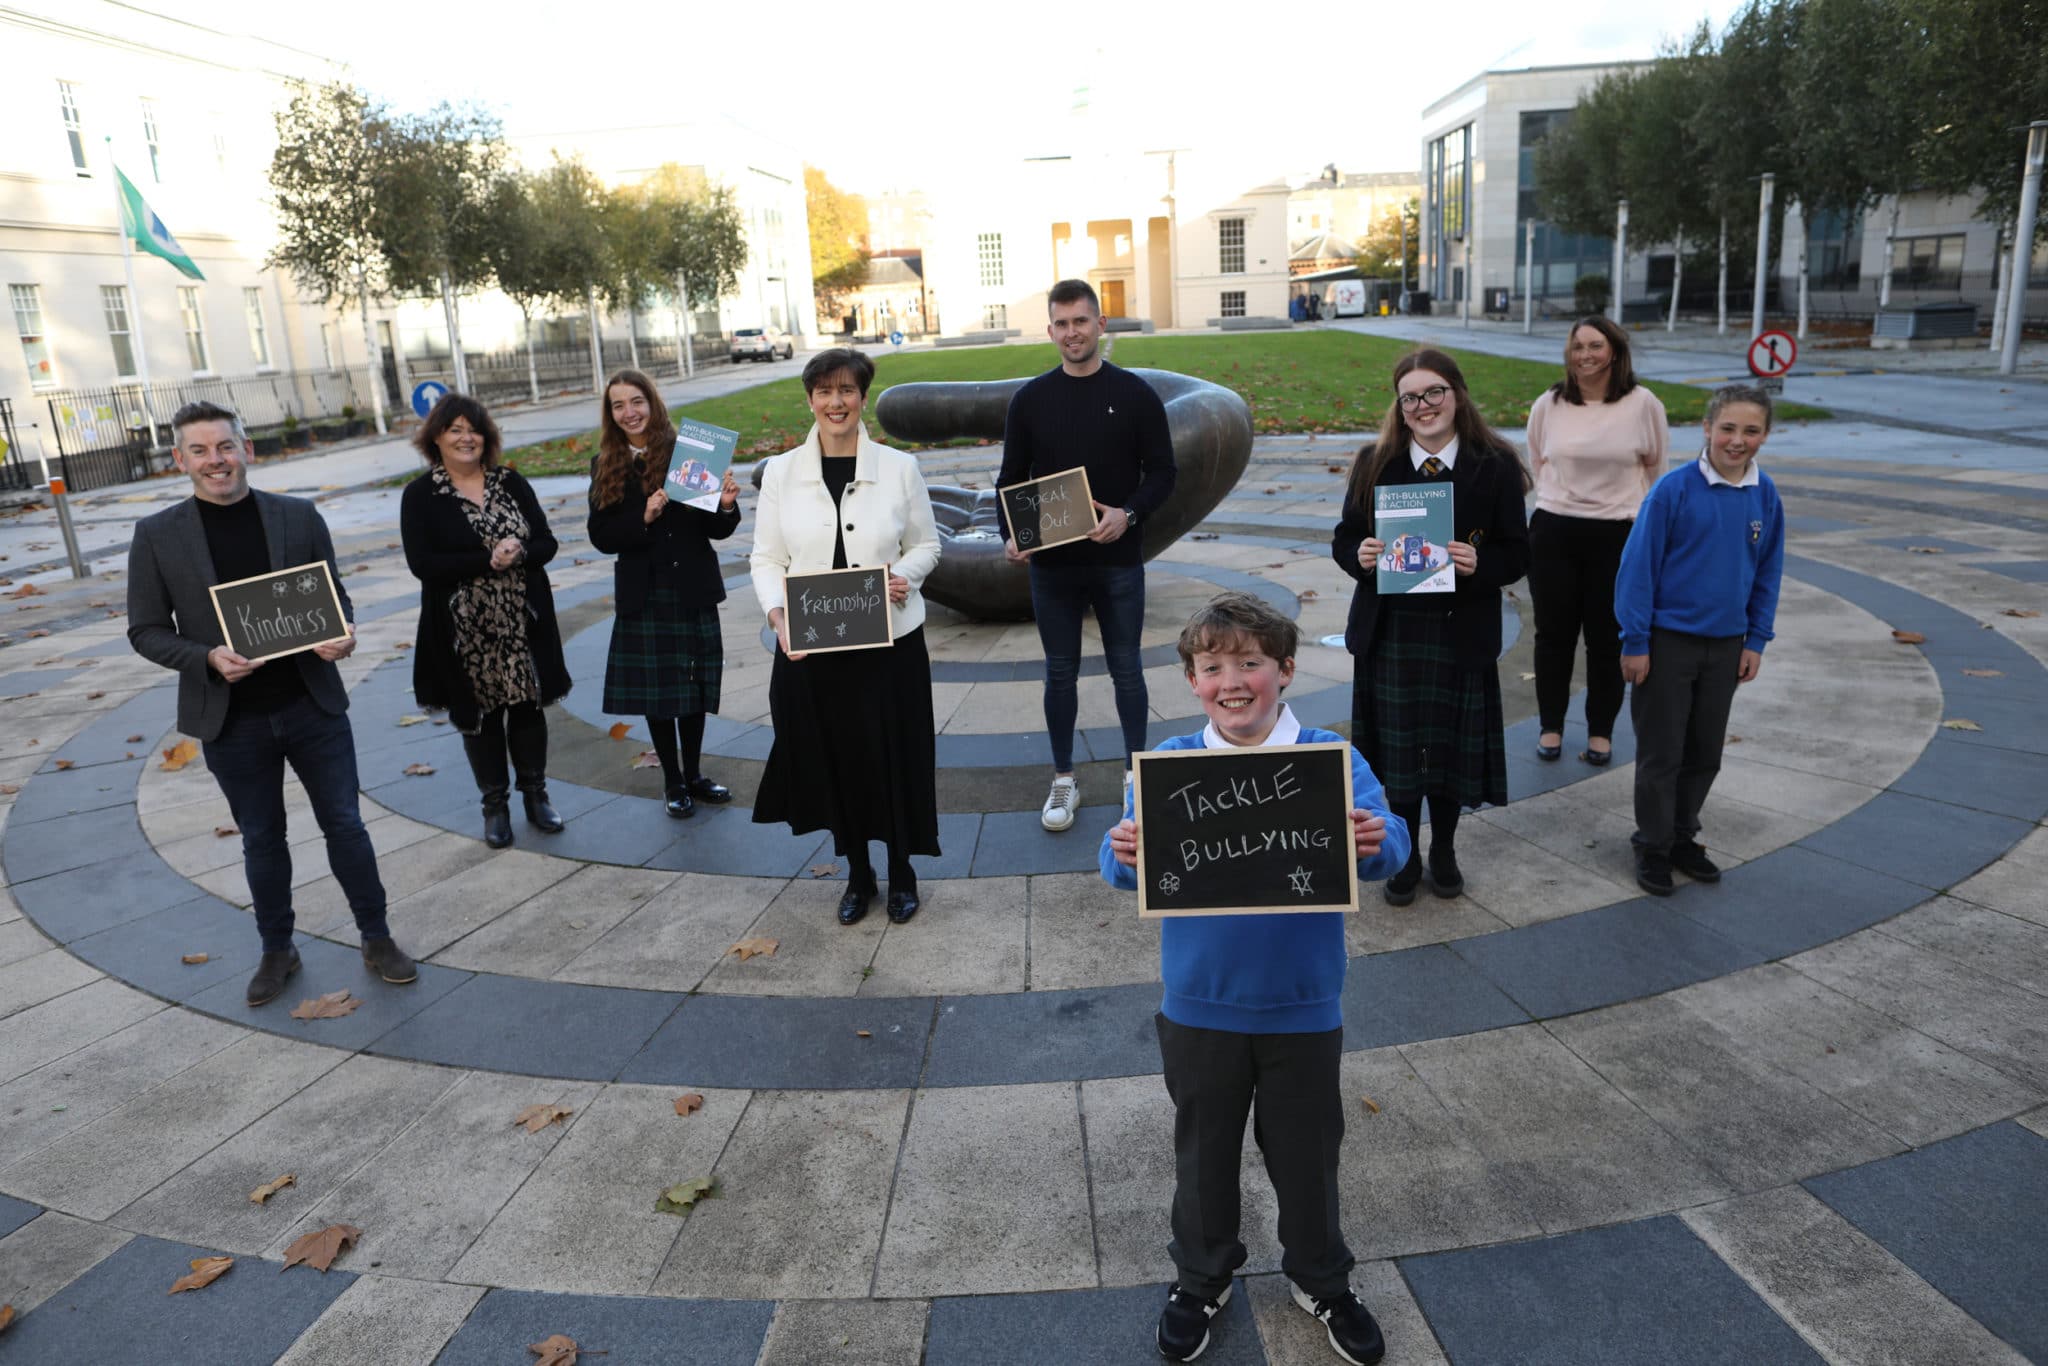 This is a photo of a group of poeple, adults and children. They are holding signs with positive messages on them along with booklets titled "Anti-Bullying in Action".